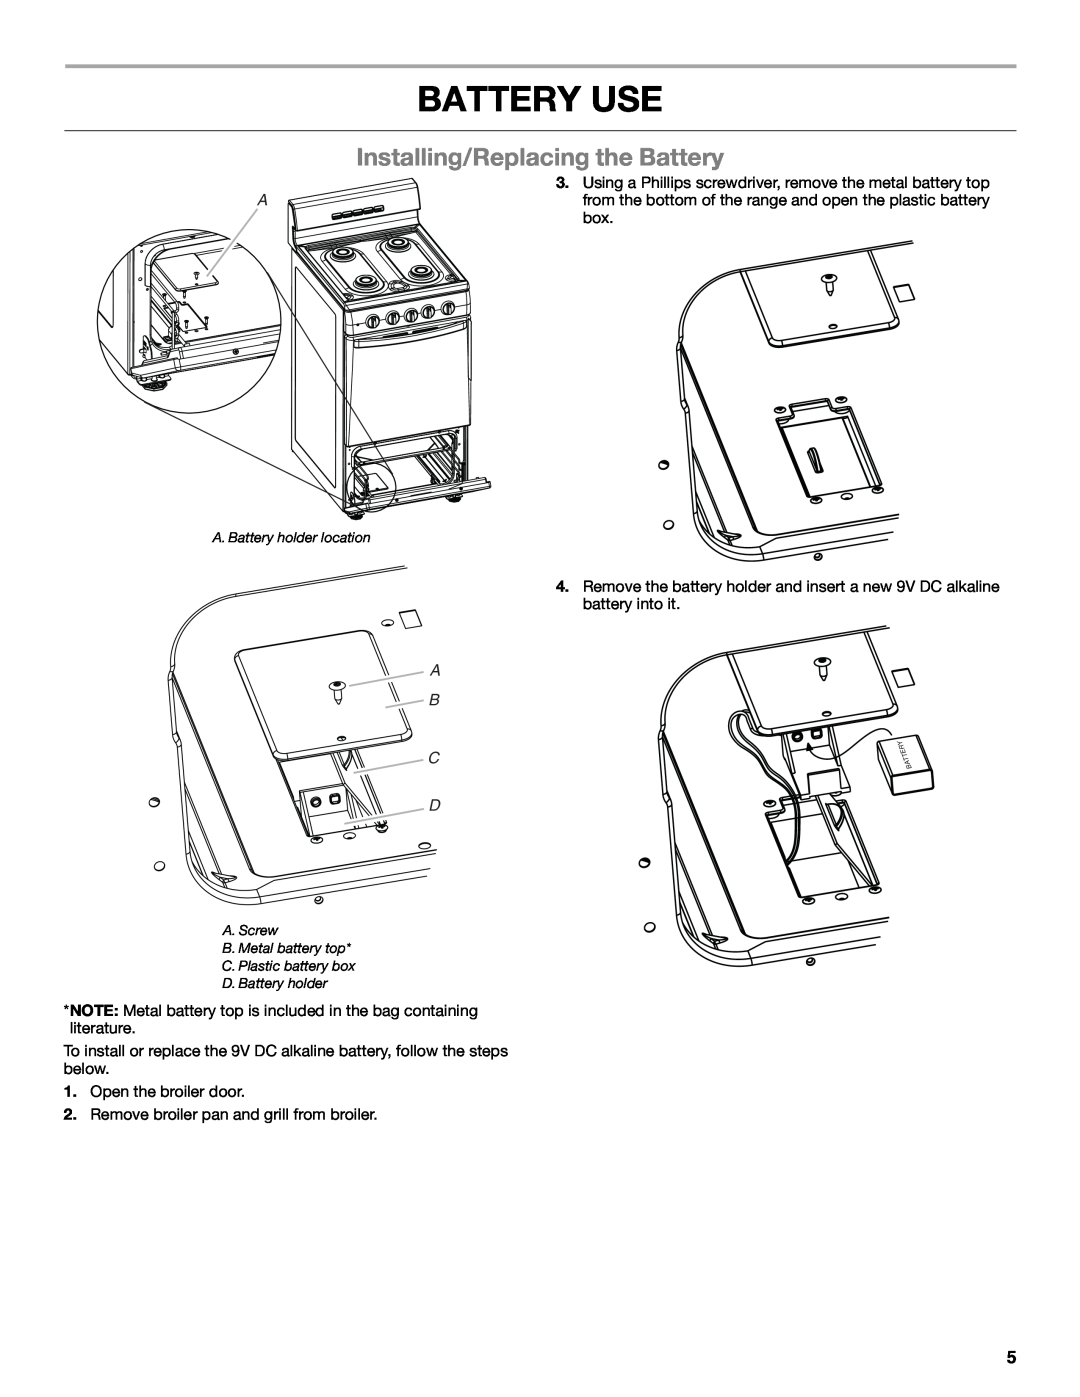 Amana W10531343A manual Battery Use, Installing/Replacing the Battery, A B C D 